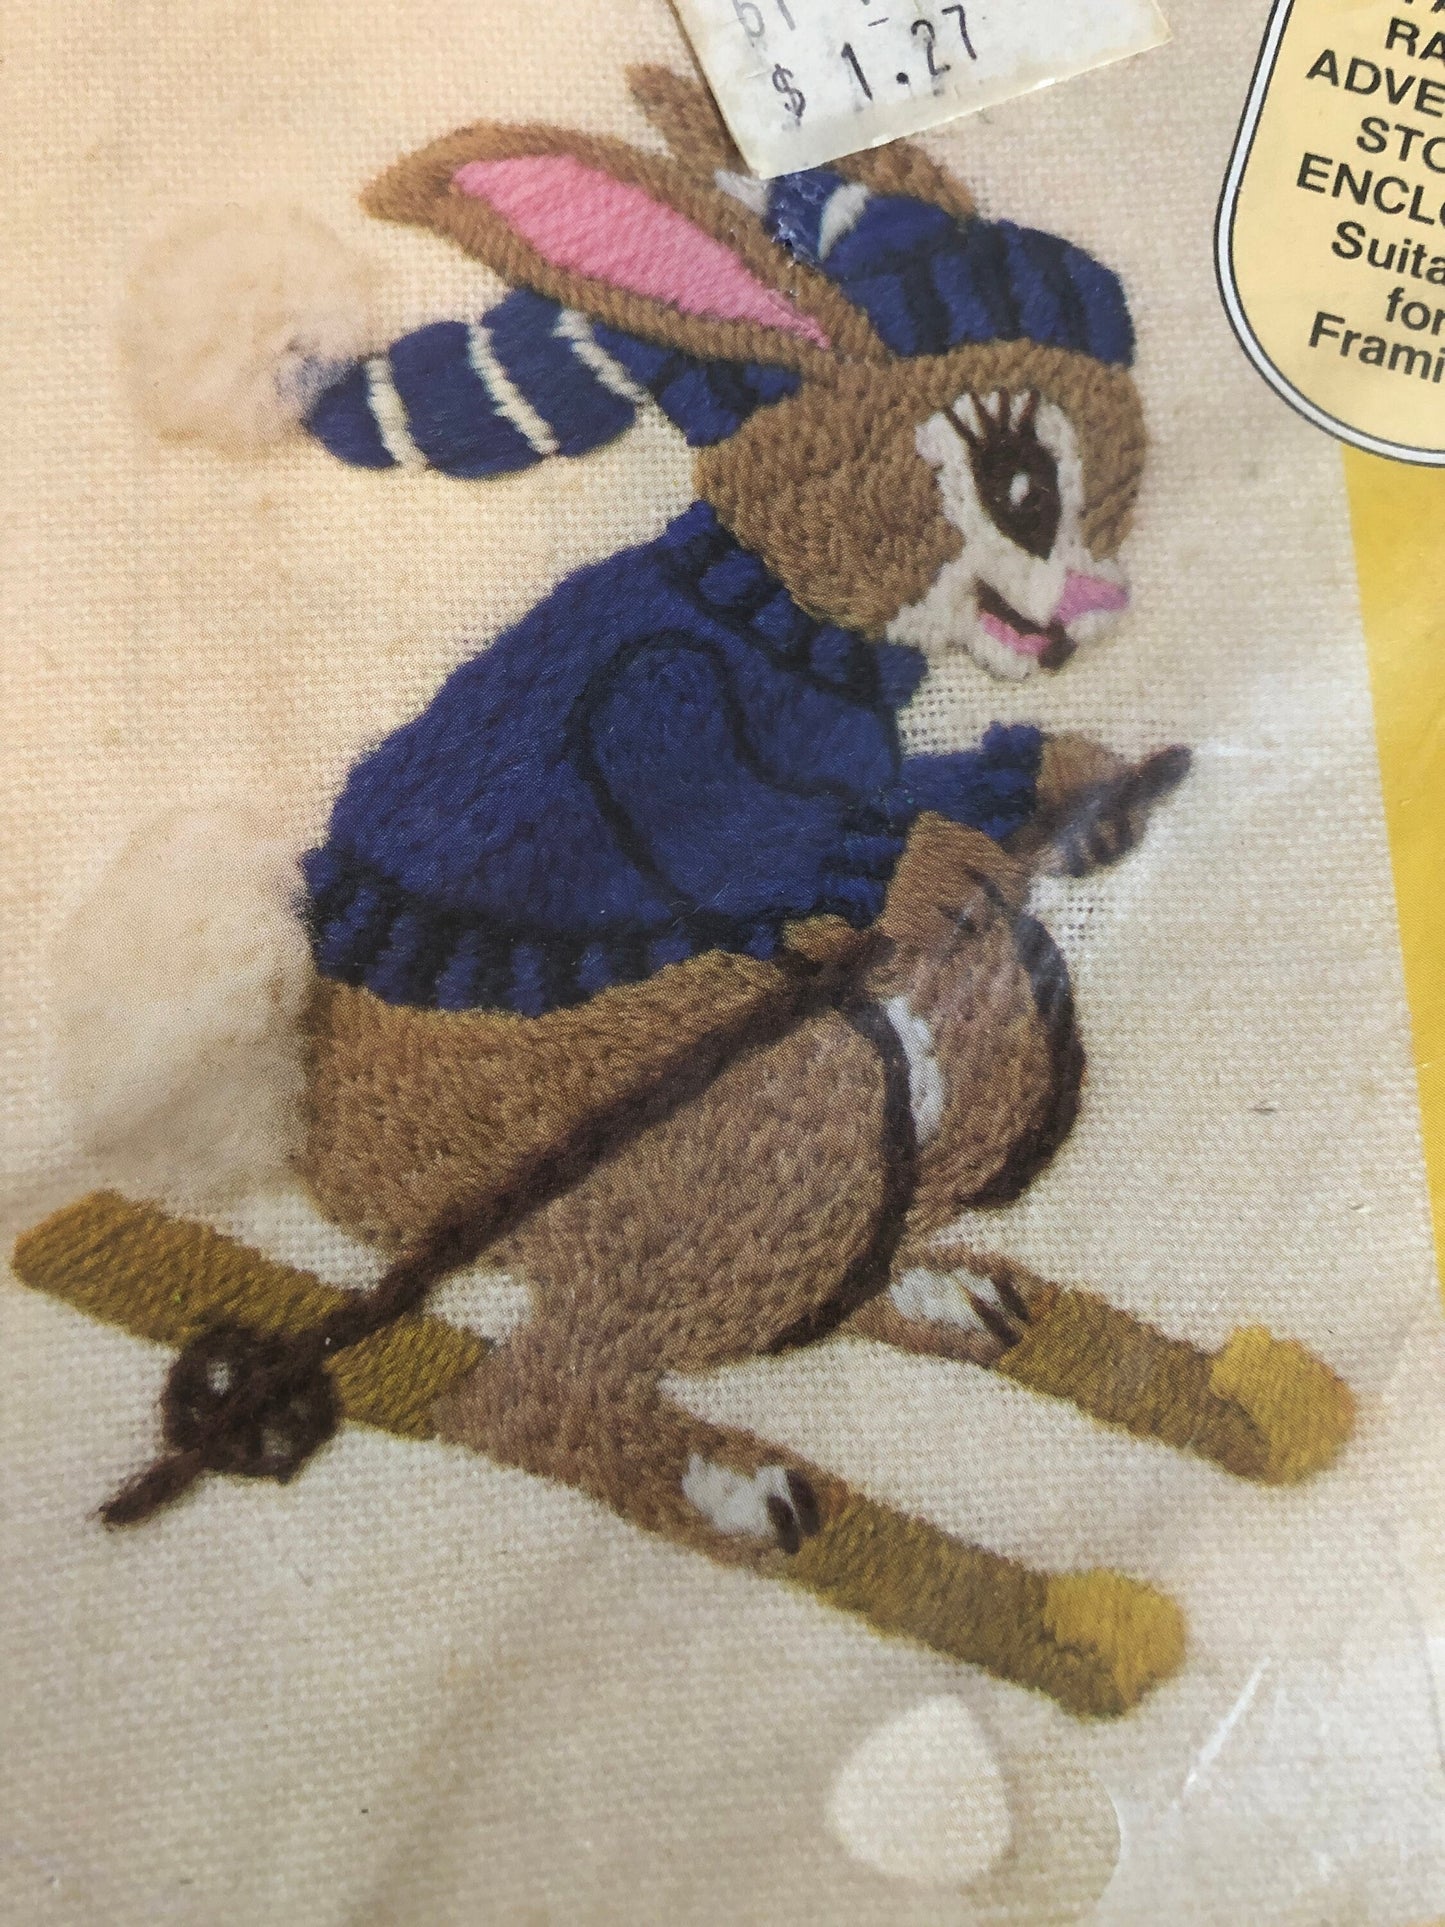 Robert Rabbit Learns to Ski and Rose Rabbit Goes Skating, Wonder Art, Creative Needle-crafts, Set of 2 Vintage Crewel Kits, 5 by 7 Inches*